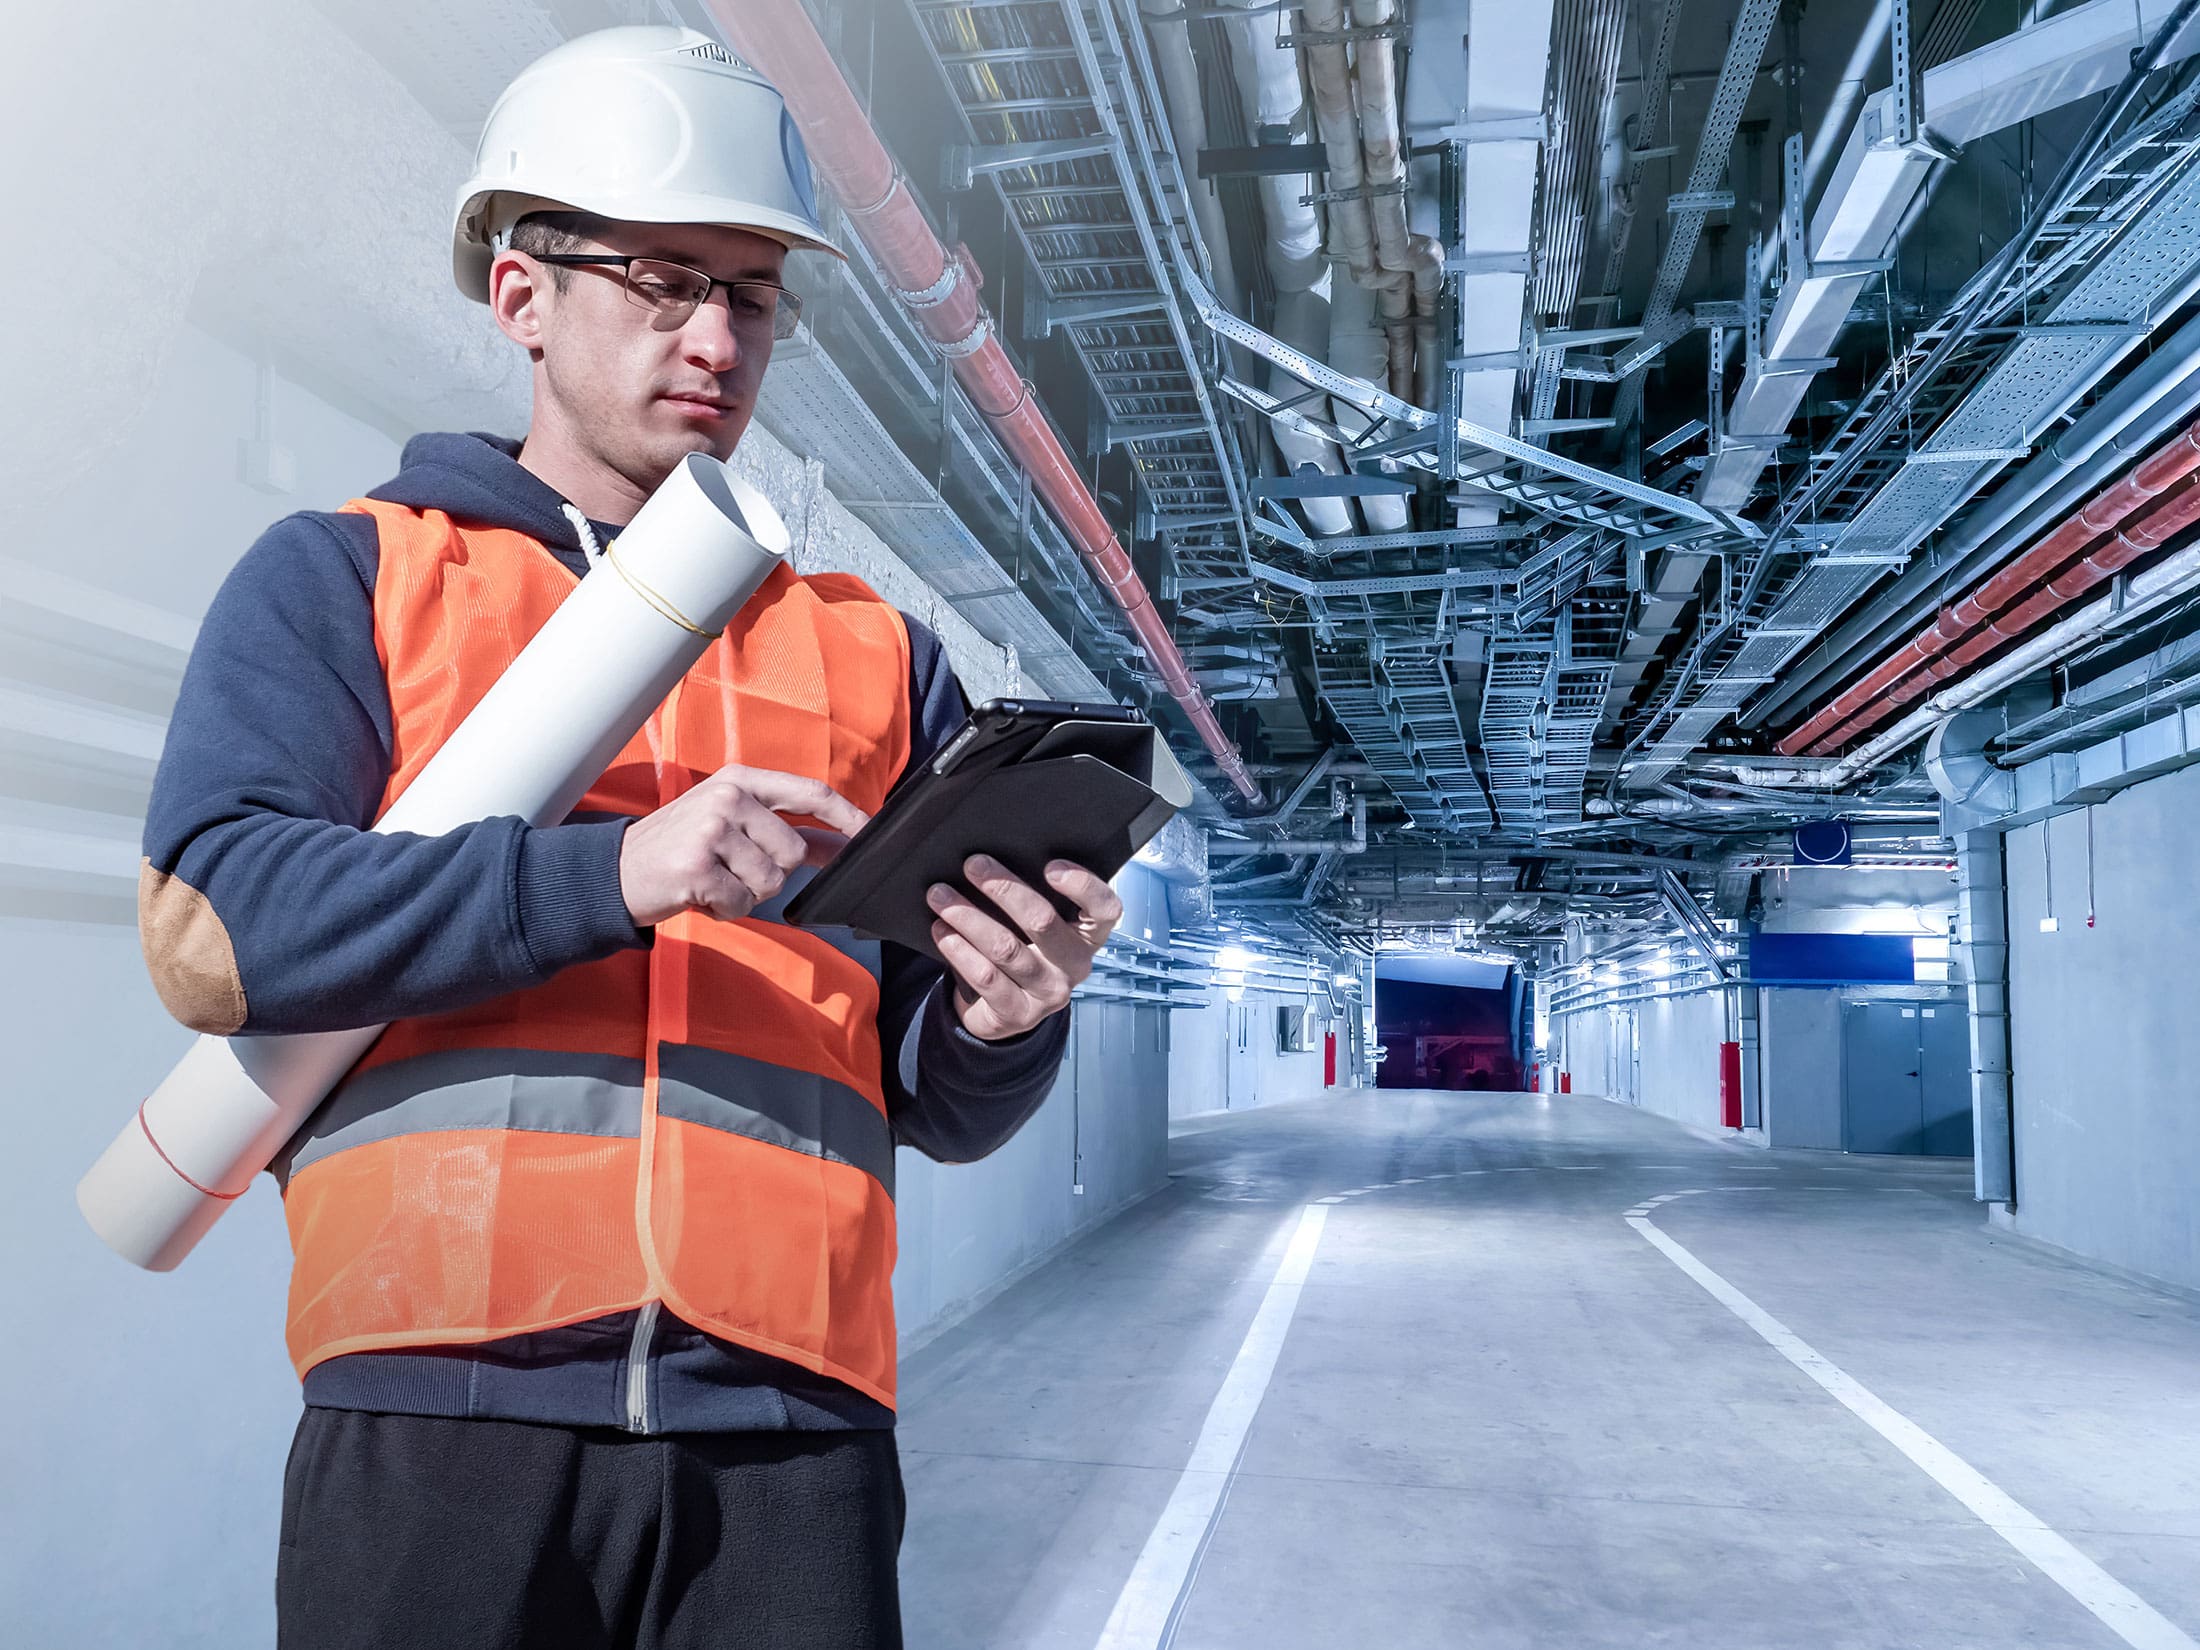 an onsite picture of a SITA employee carrying a white tube under his arm and checking plans on his tablet phone